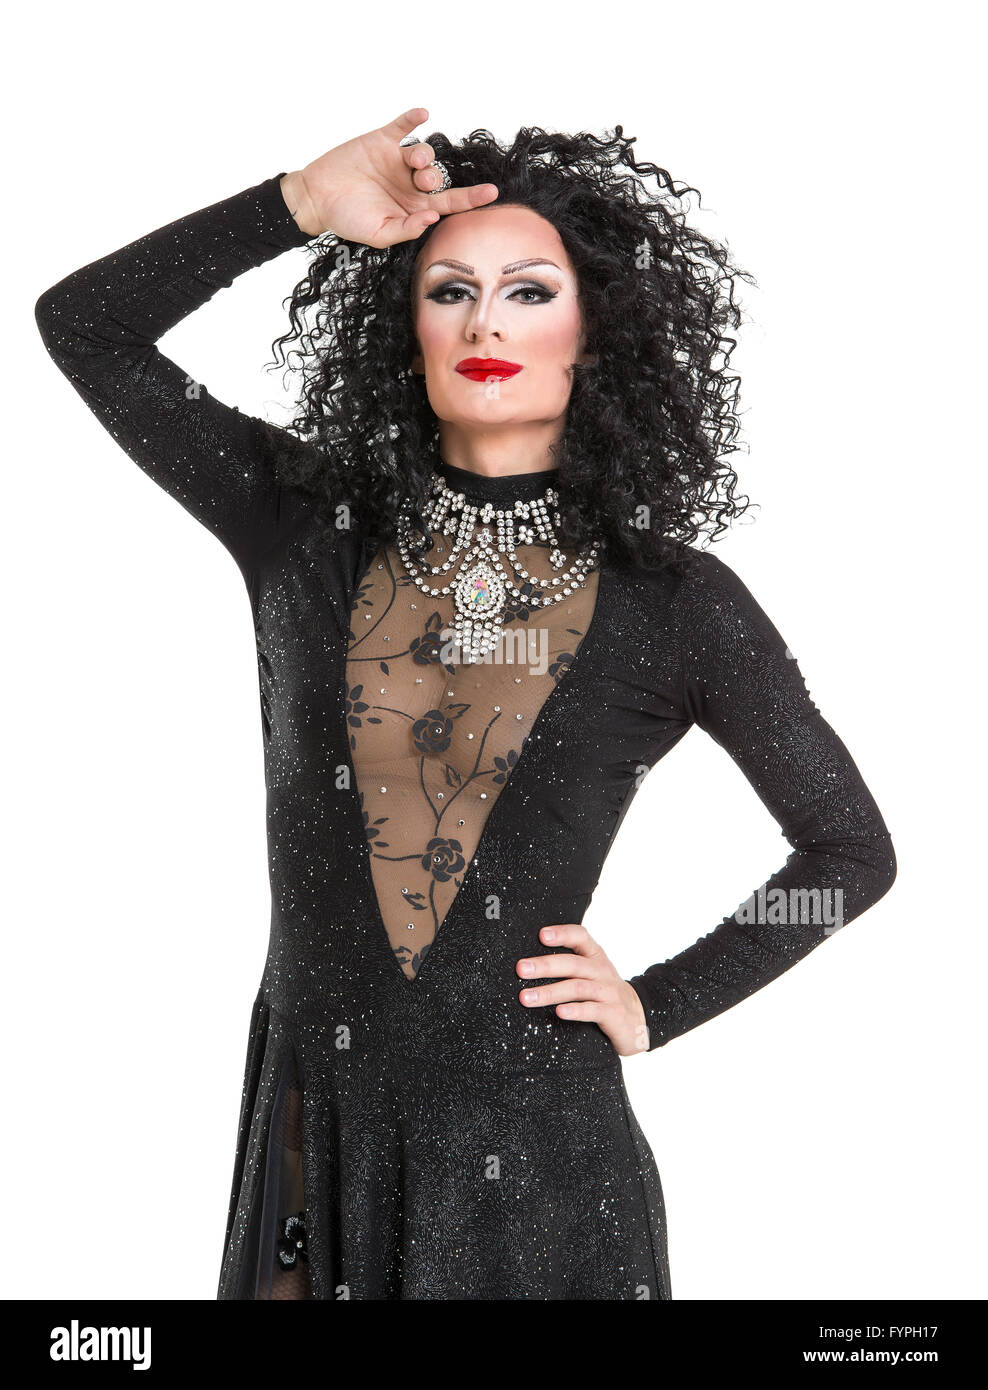 Drag Queen in Black Evening Dress Performing Stock Photo